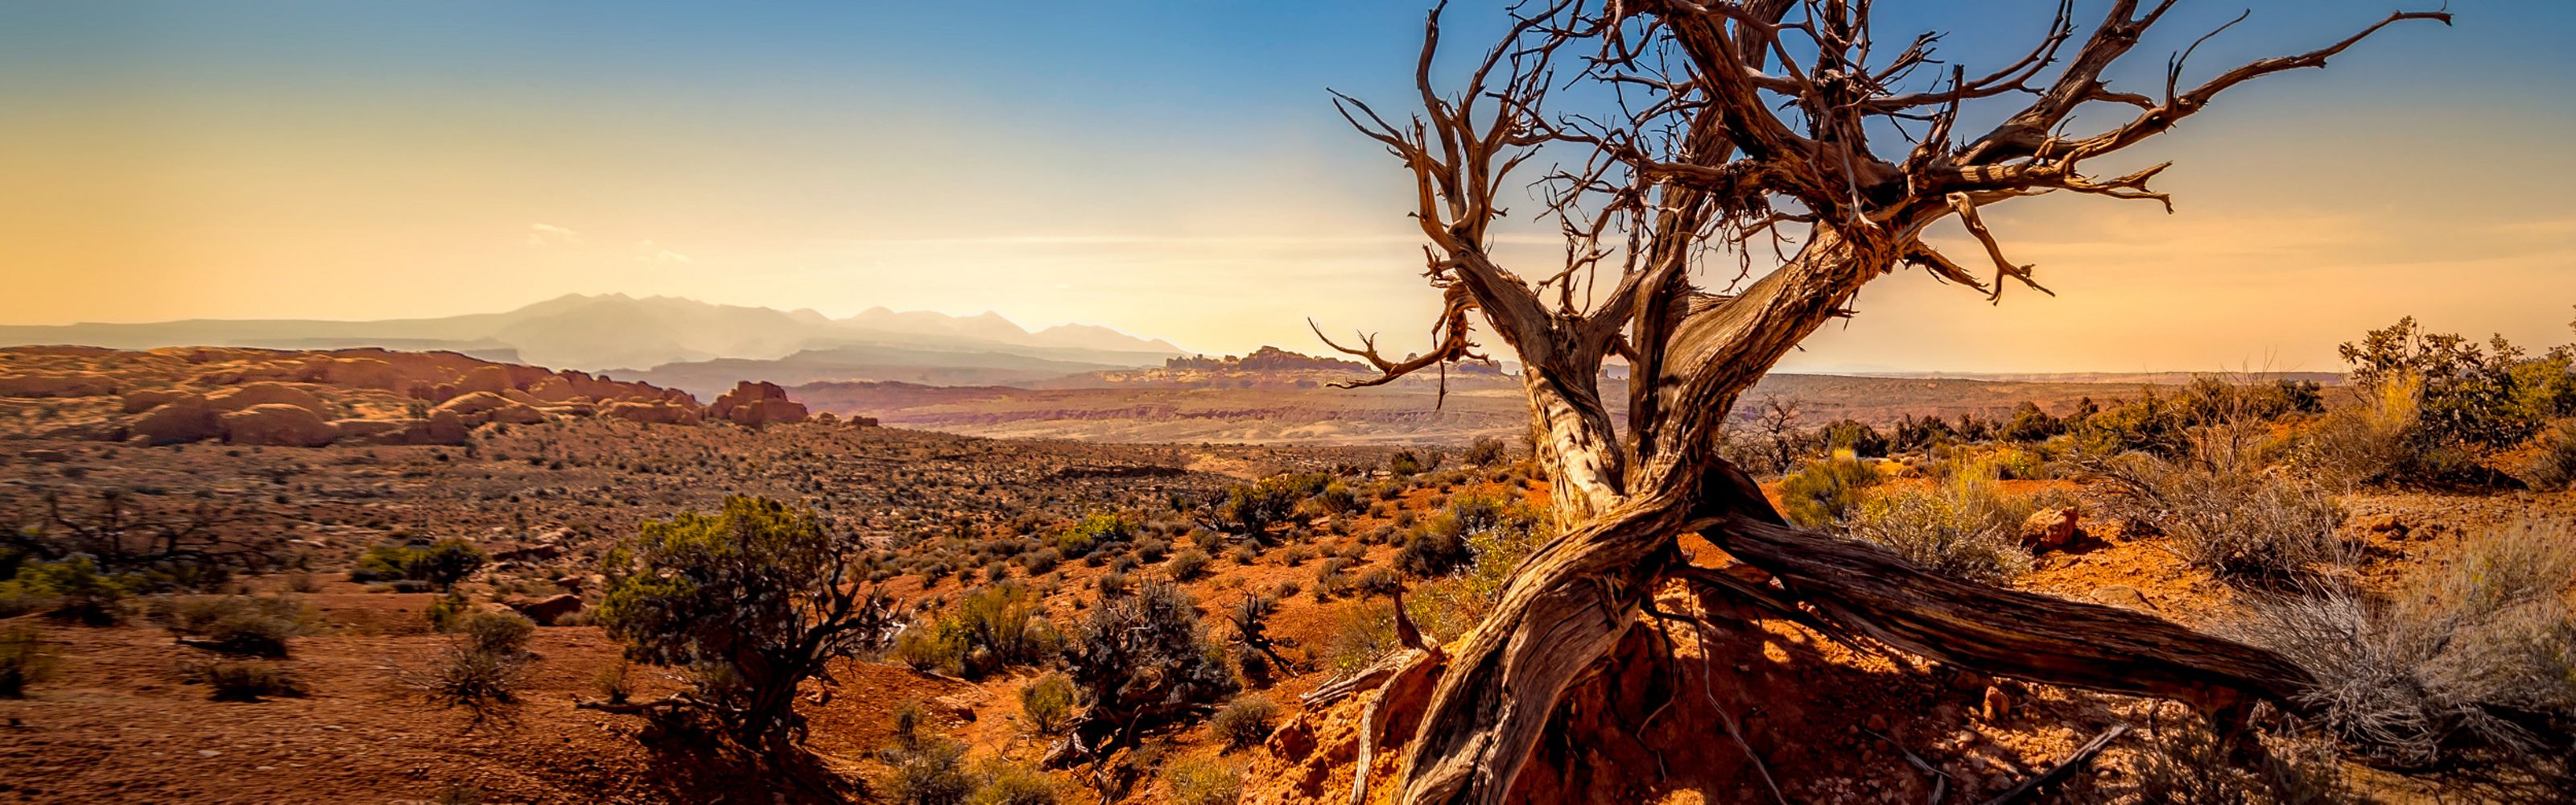 A desert tree stands watch over Arches National Park in Southern Utah. This tree has twisted in the elements for longer than any of us has been around.